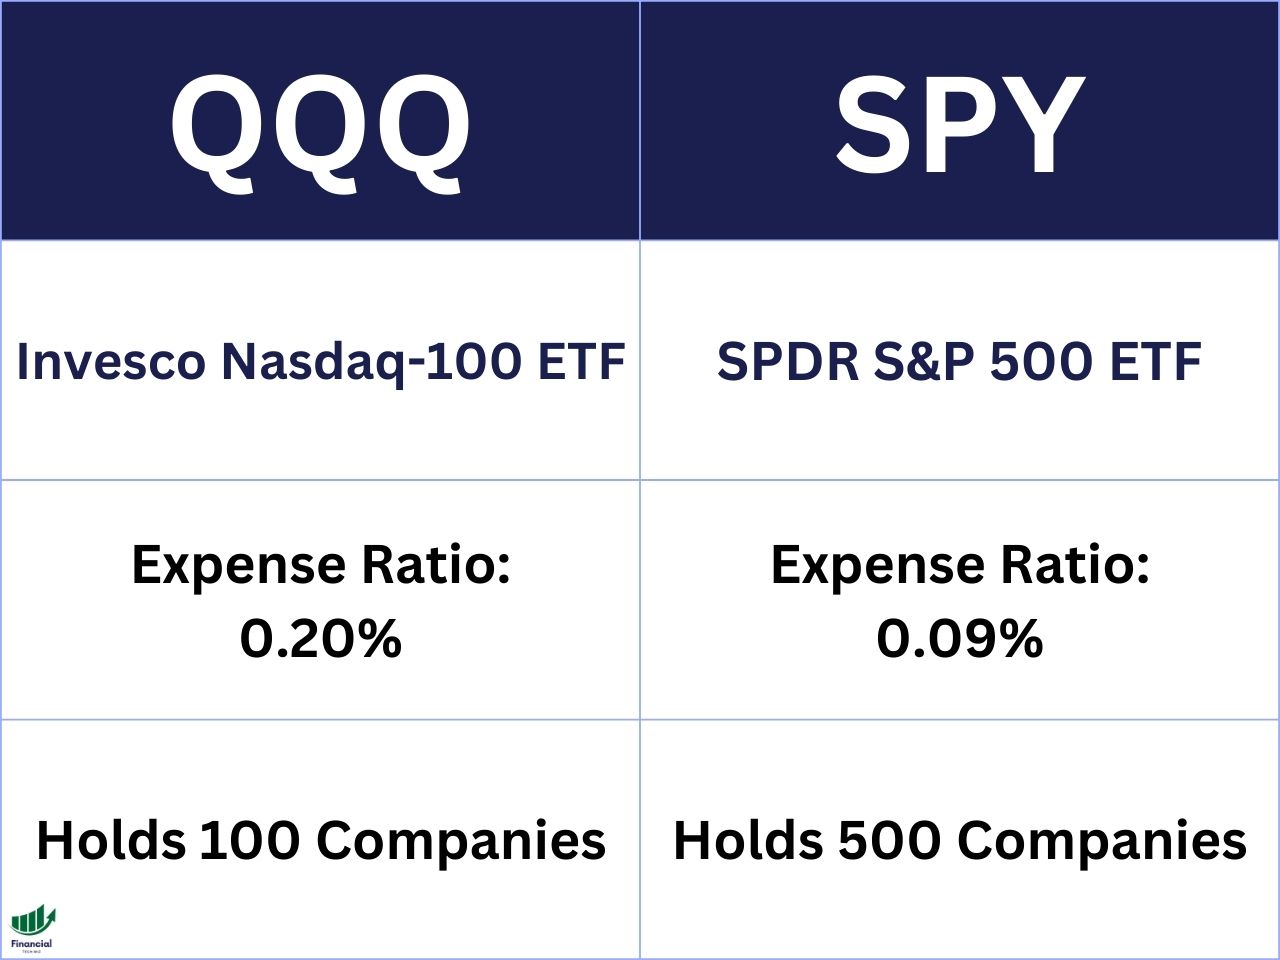 SPY vs QQQ Stock Analysis: Which is a Better Buy?